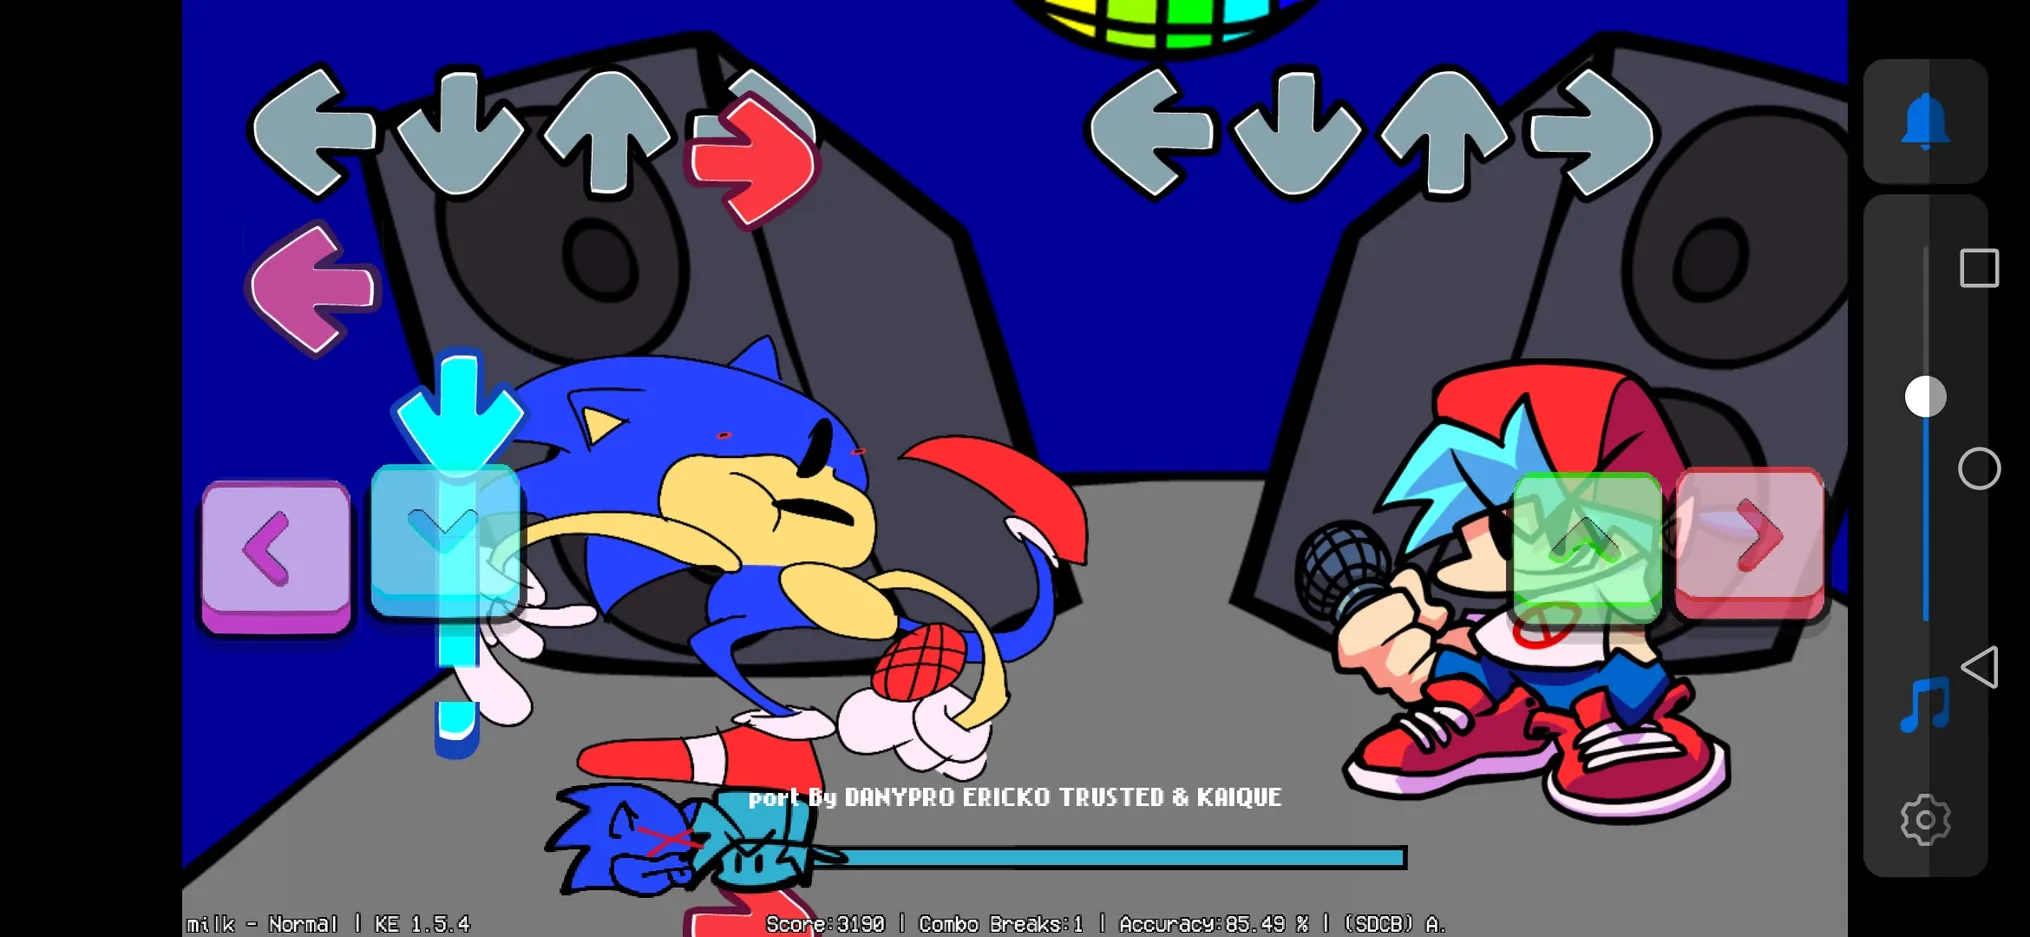 Sonic Exe Messenger Apk Download for Android- Latest version 2.0-  com.wSonicExeMessenger_6221421